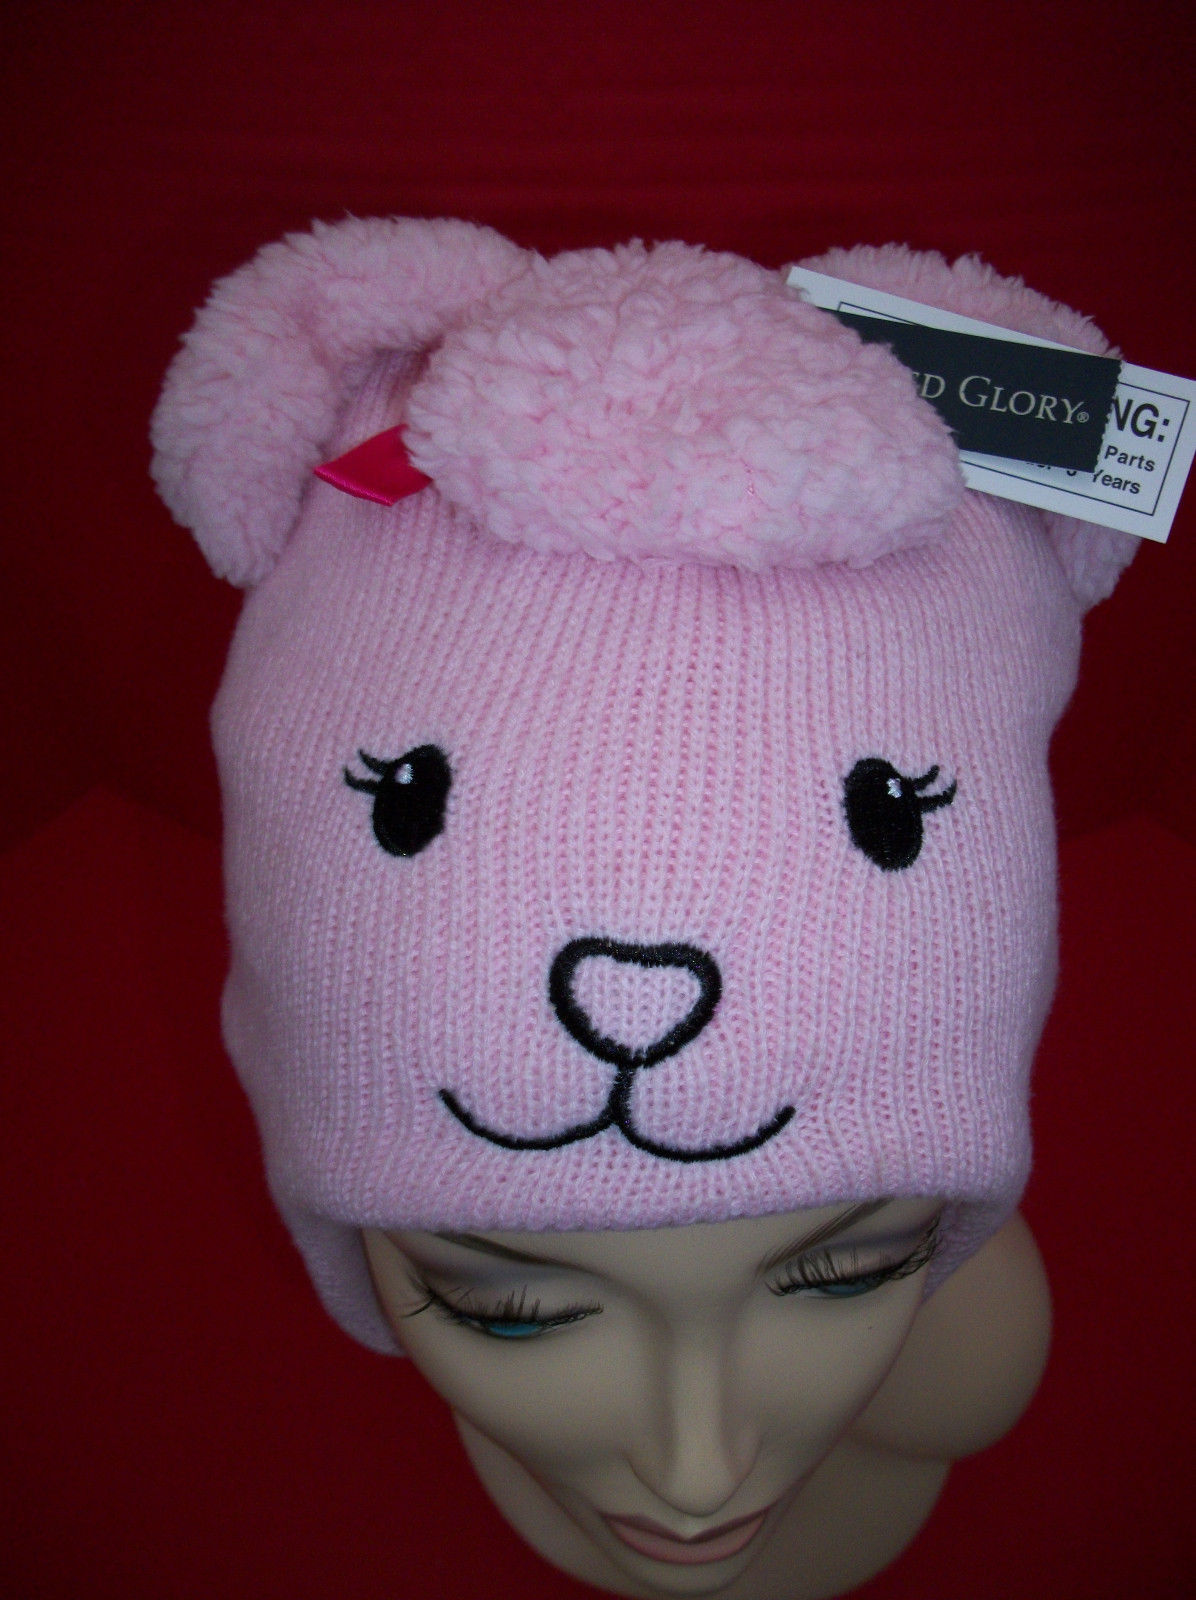 Faded Glory Baby Clothes Kid Toddler Cold Weather Gear Hat Pink Poodle Puppy Cap - $9.49